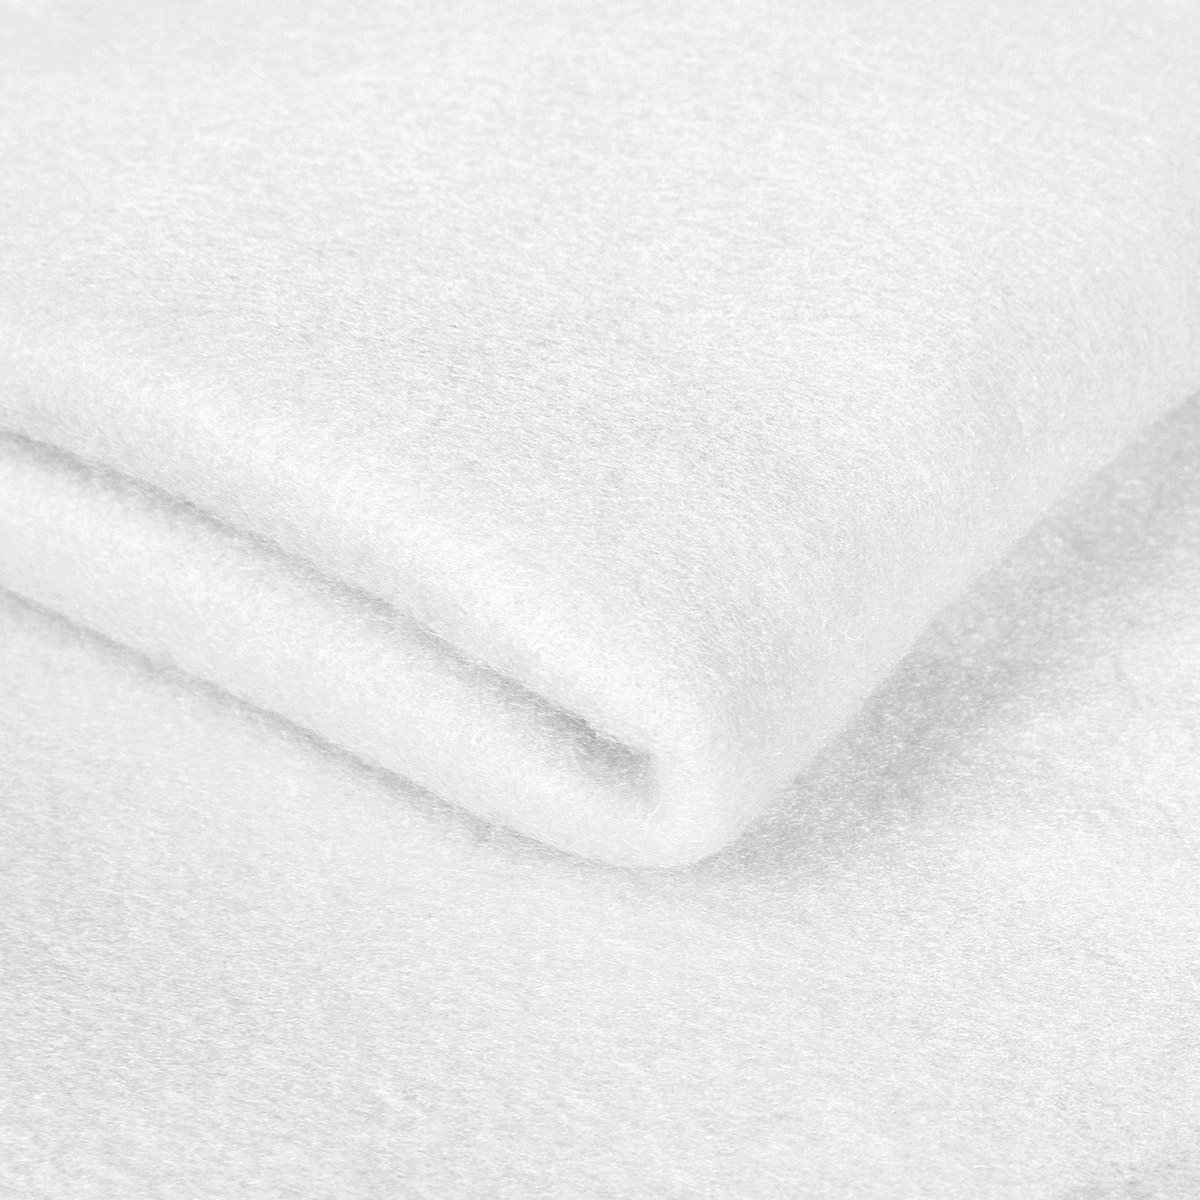 White Sherpa Fabric, Fleece Fabric, 100% Polyester, Blankets Fabric, Fabric  by the Yard, Stuffed Toys Fabric, Soft & Fluffy 